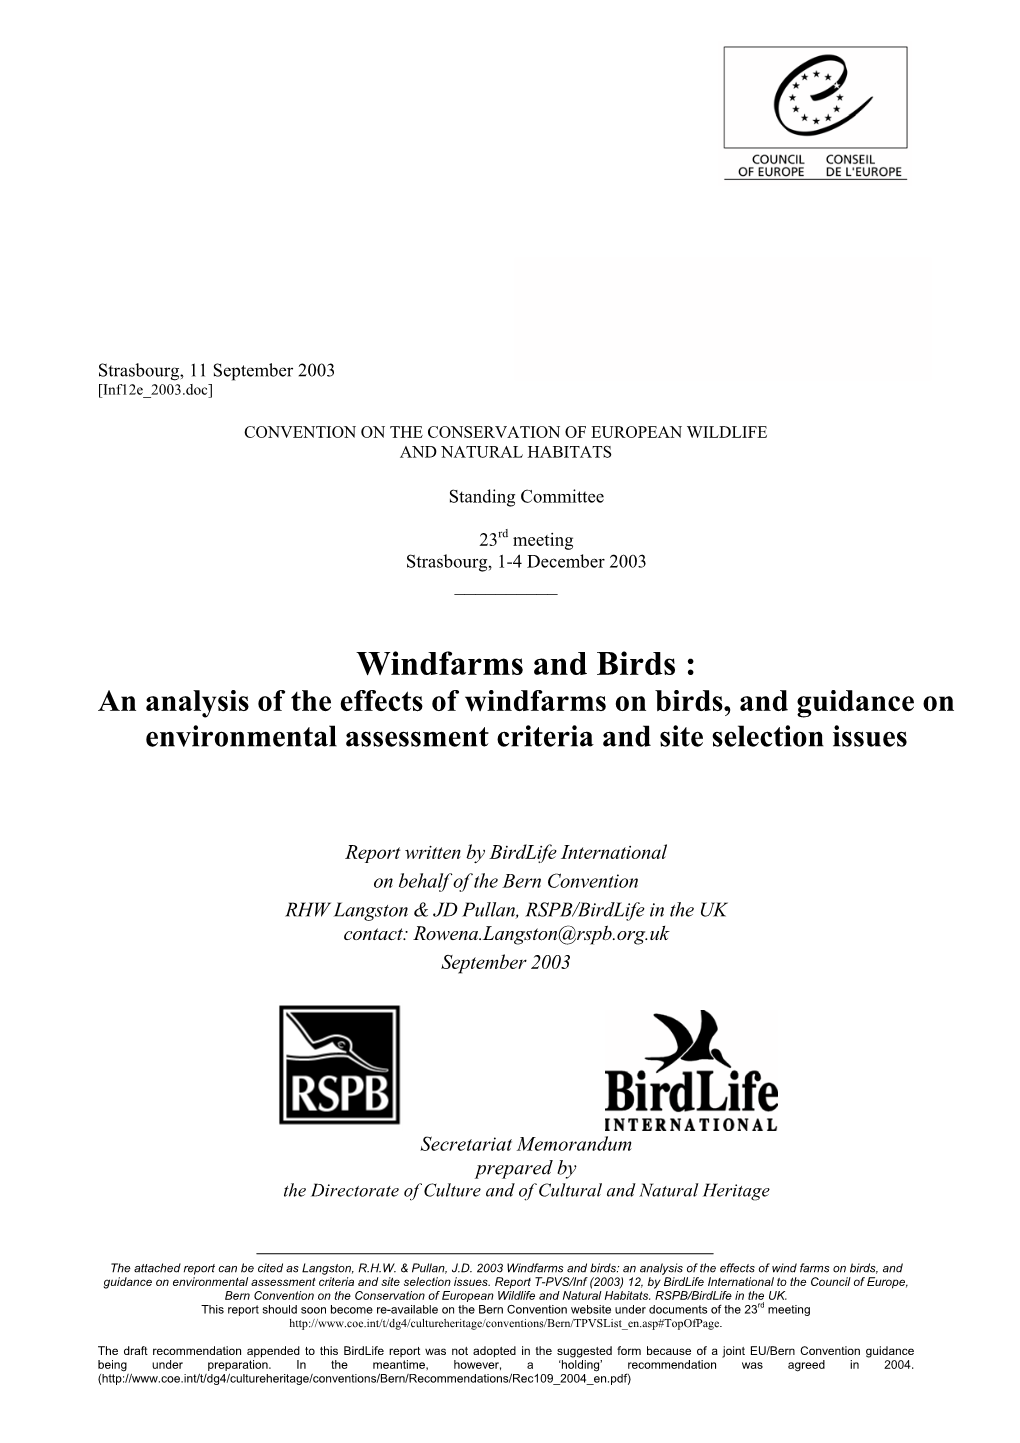 An Analysis of the Effects of Windfarms on Birds, and Guidance on Environmental Assessment Criteria and Site Selection Issues